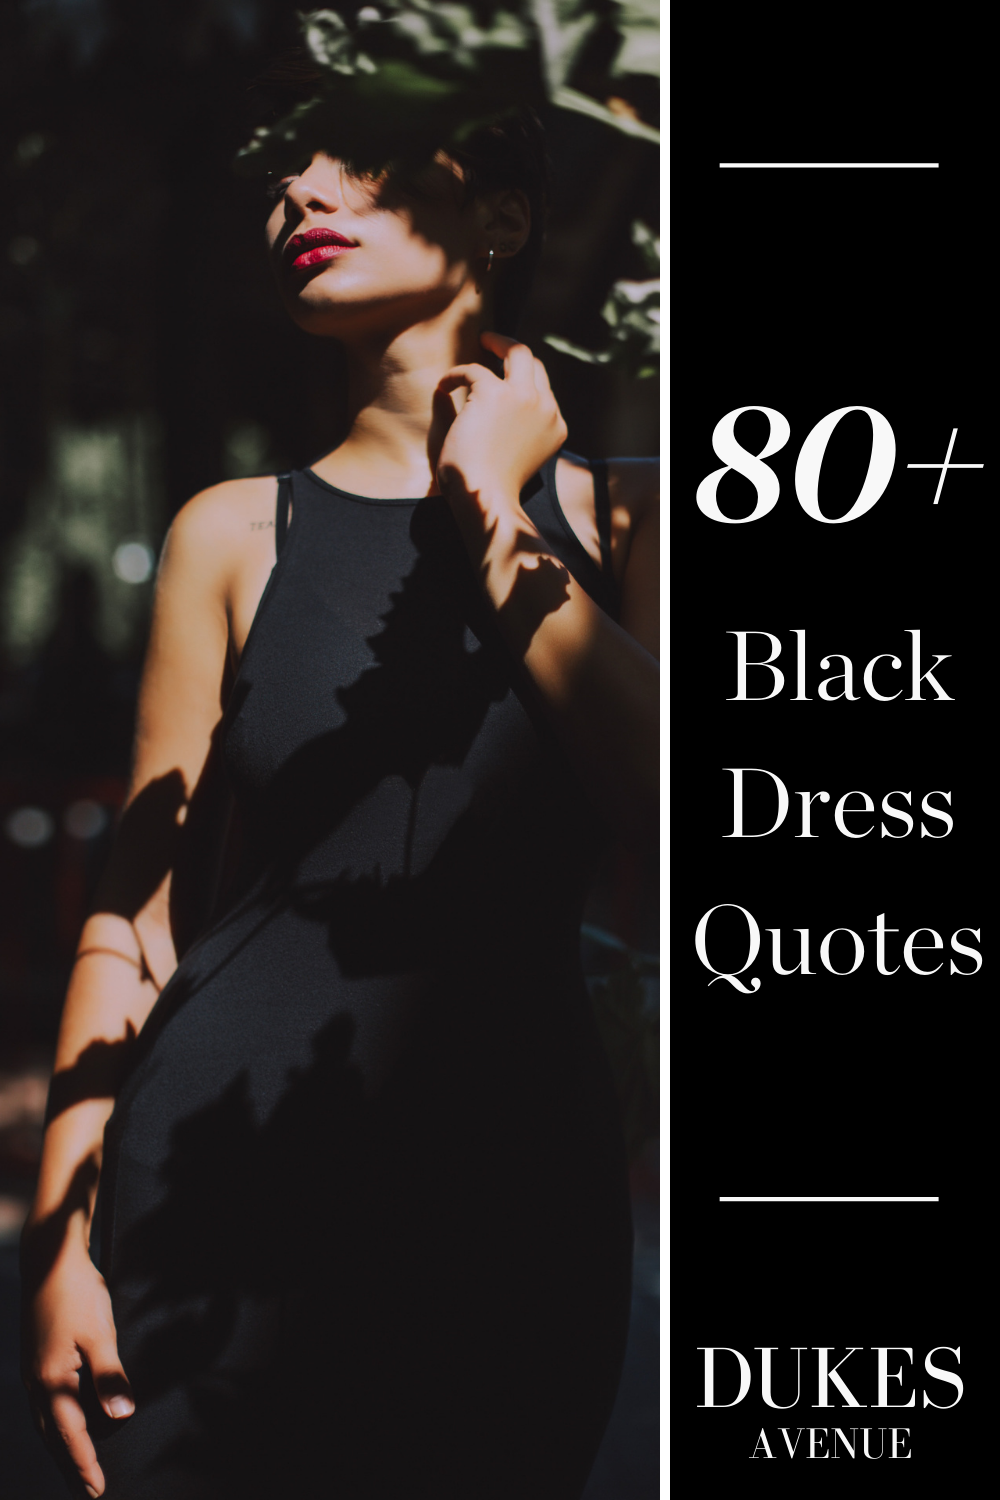 A woman wearing a black dress with text overlay "80+ black dress quotes"